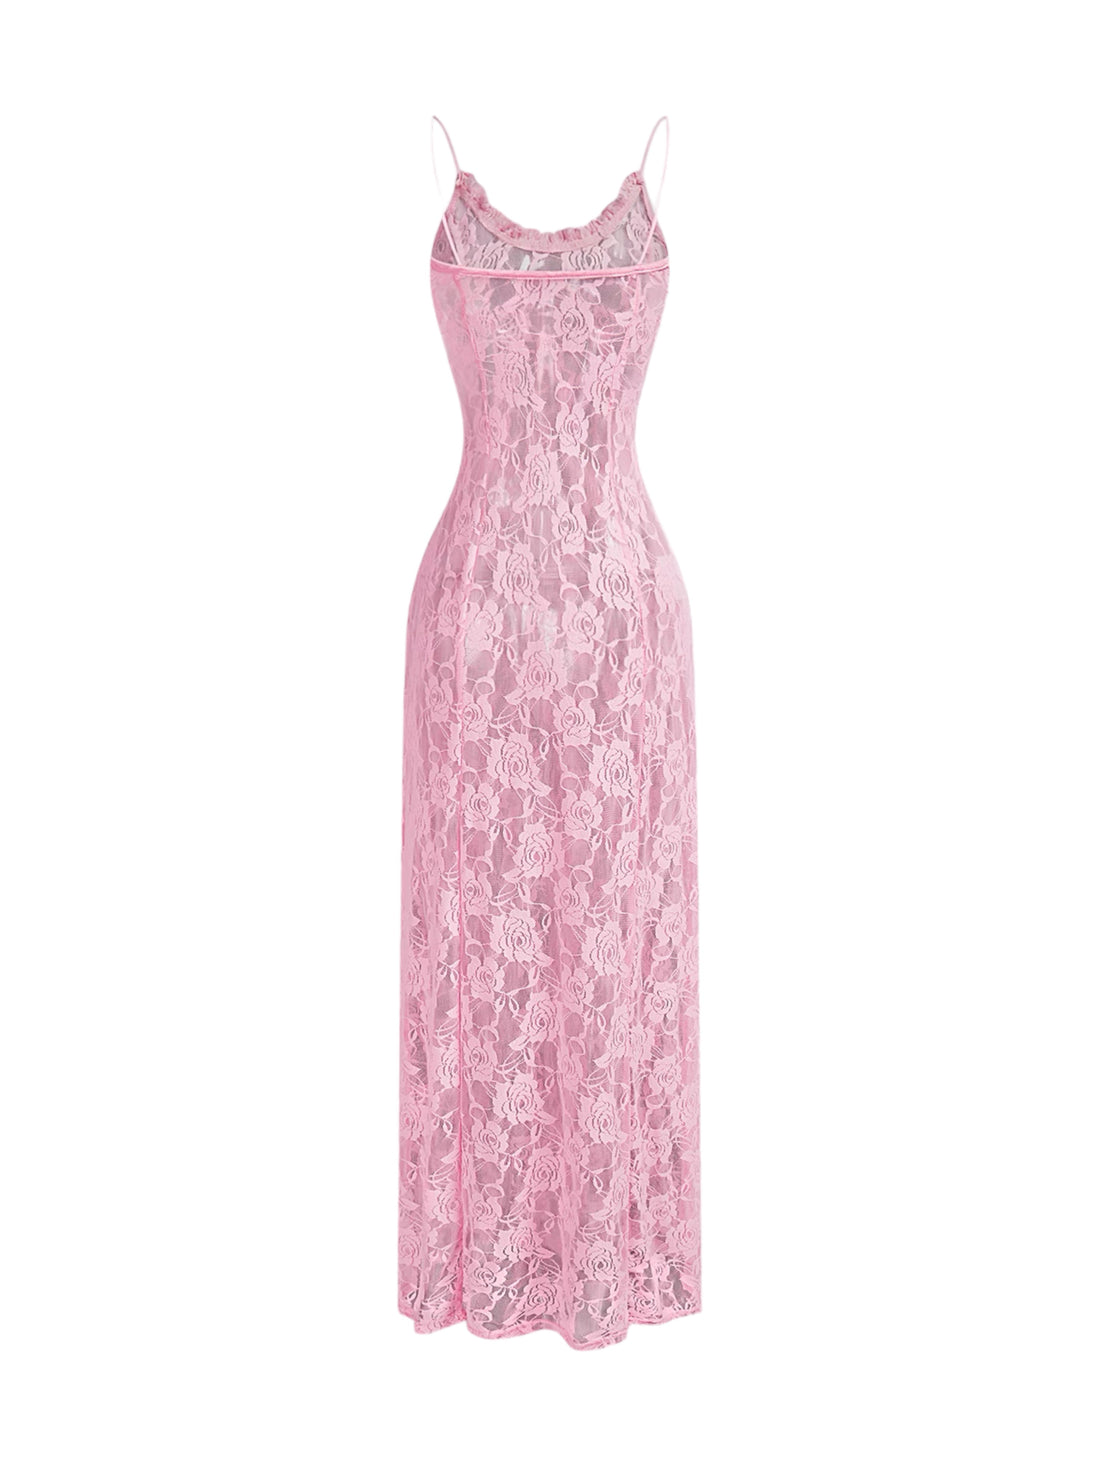 Lace See through Maxi Dress - Mabel Love Co